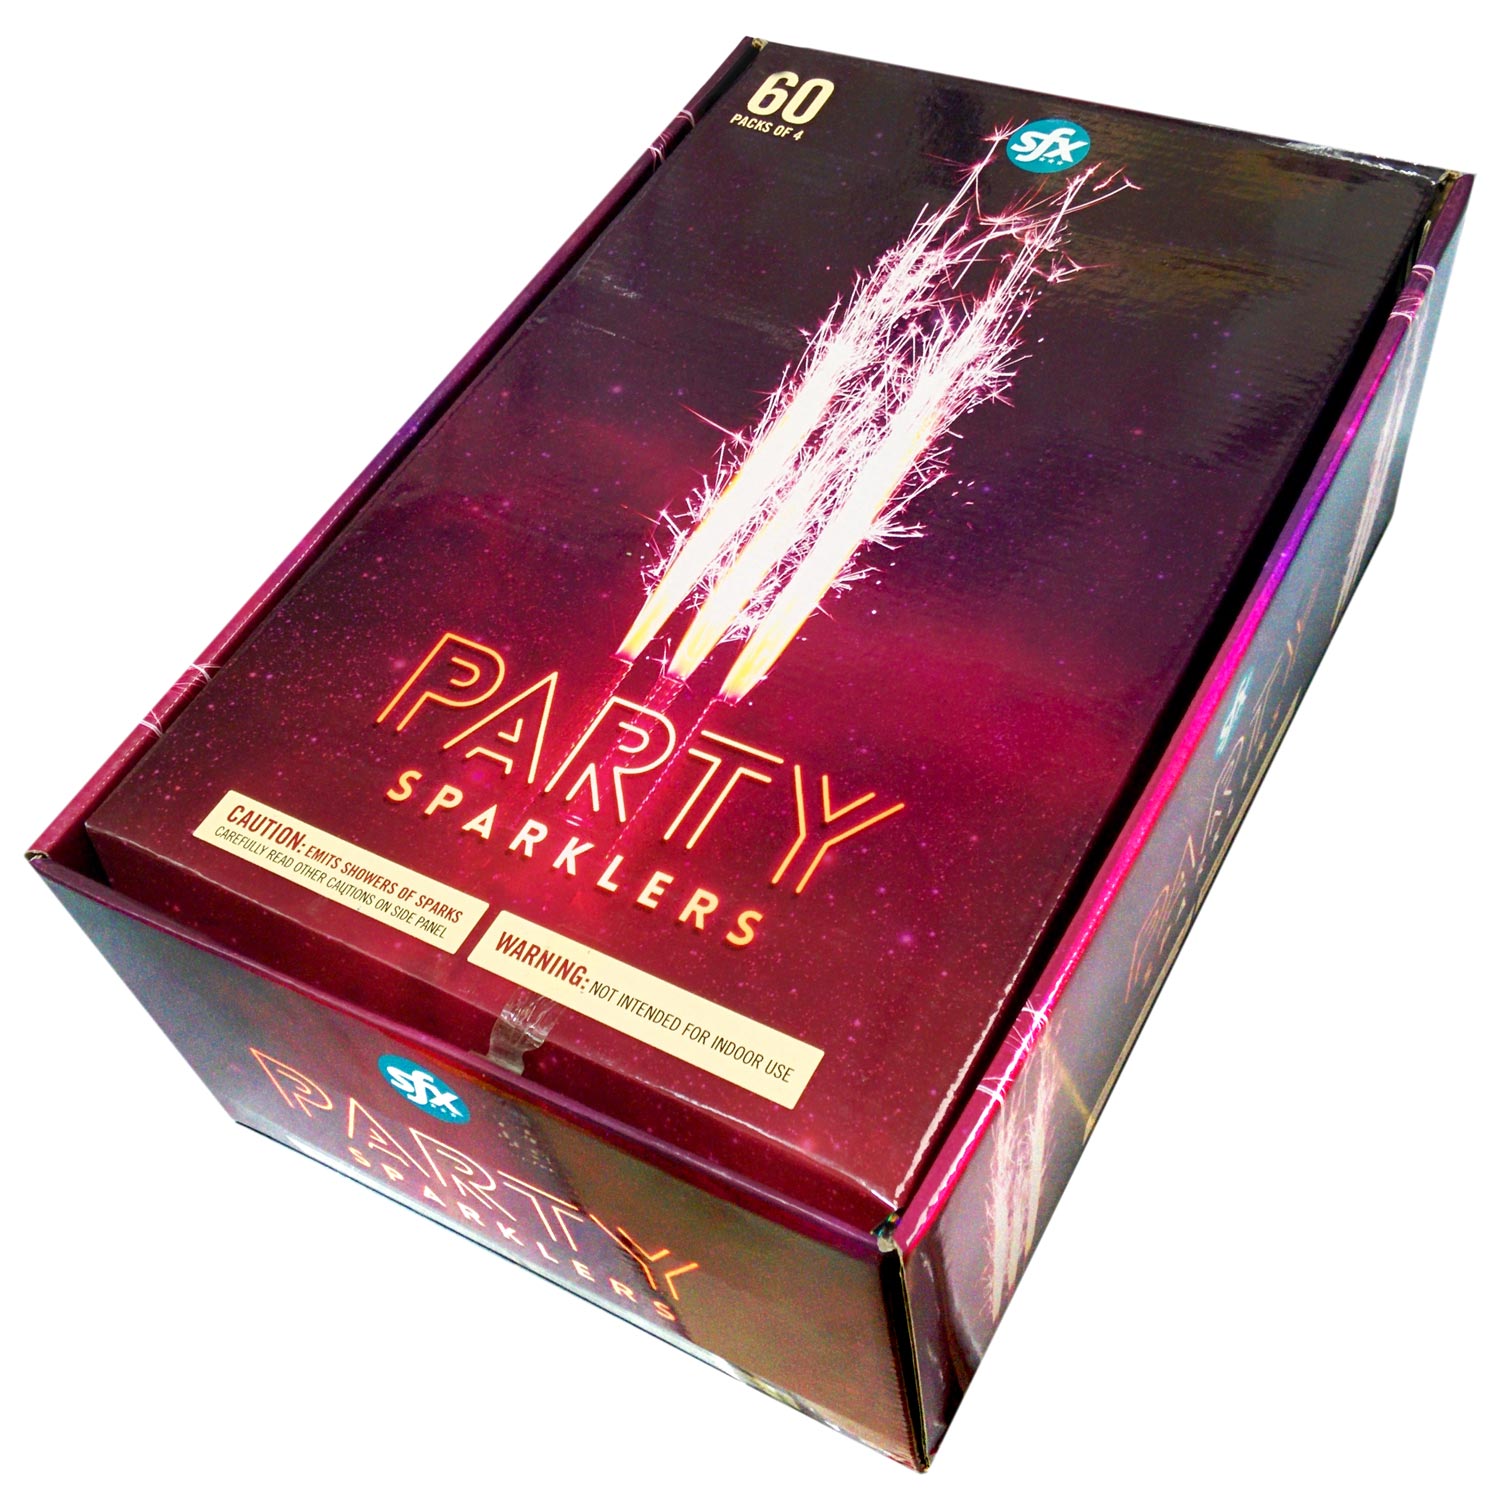 SFX Party Sparklers